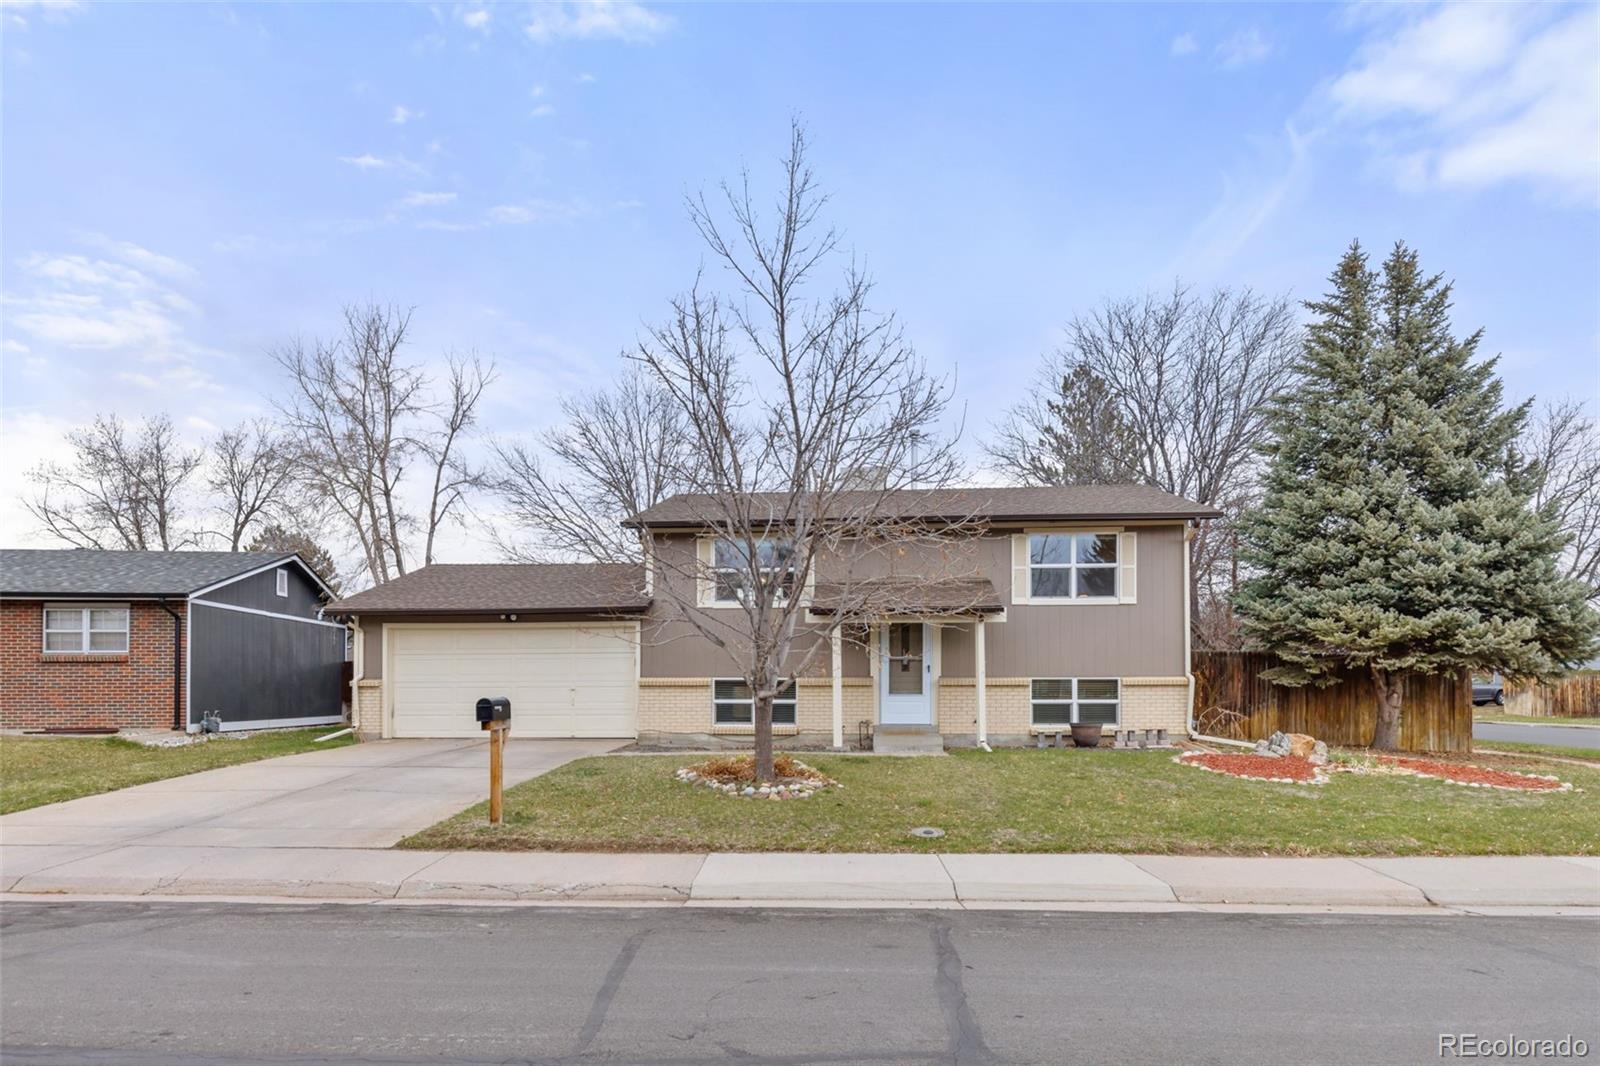 Report Image for 8919 W 91st Place,Broomfield, Colorado